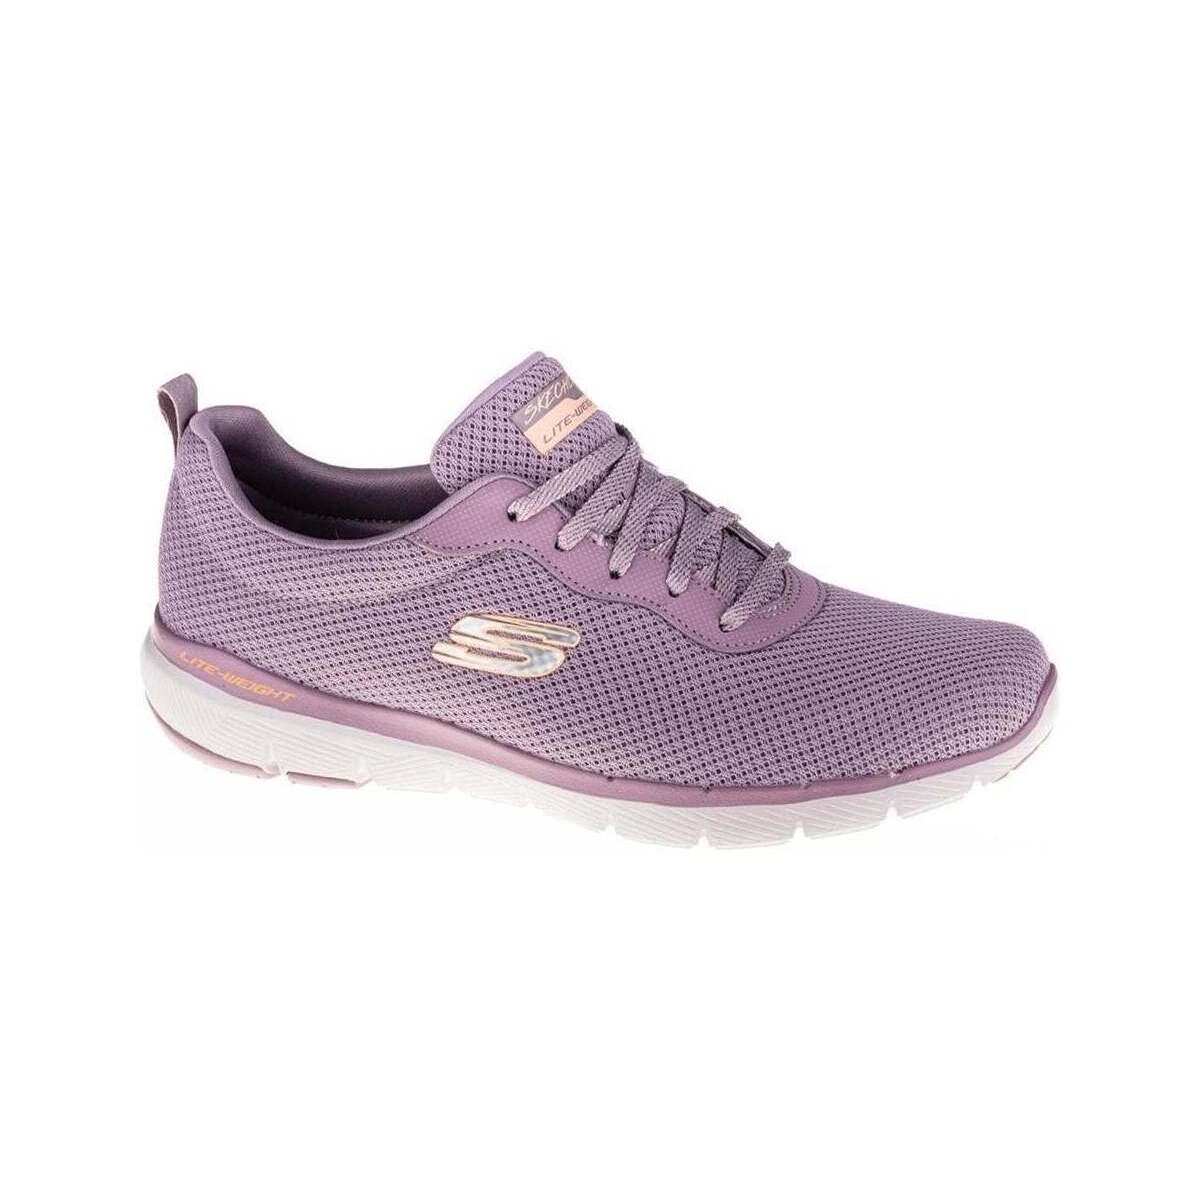 Chaussures Femme Running / trail Skechers FLEX APPEAL 3.0-FIRST INSIGHT Violet